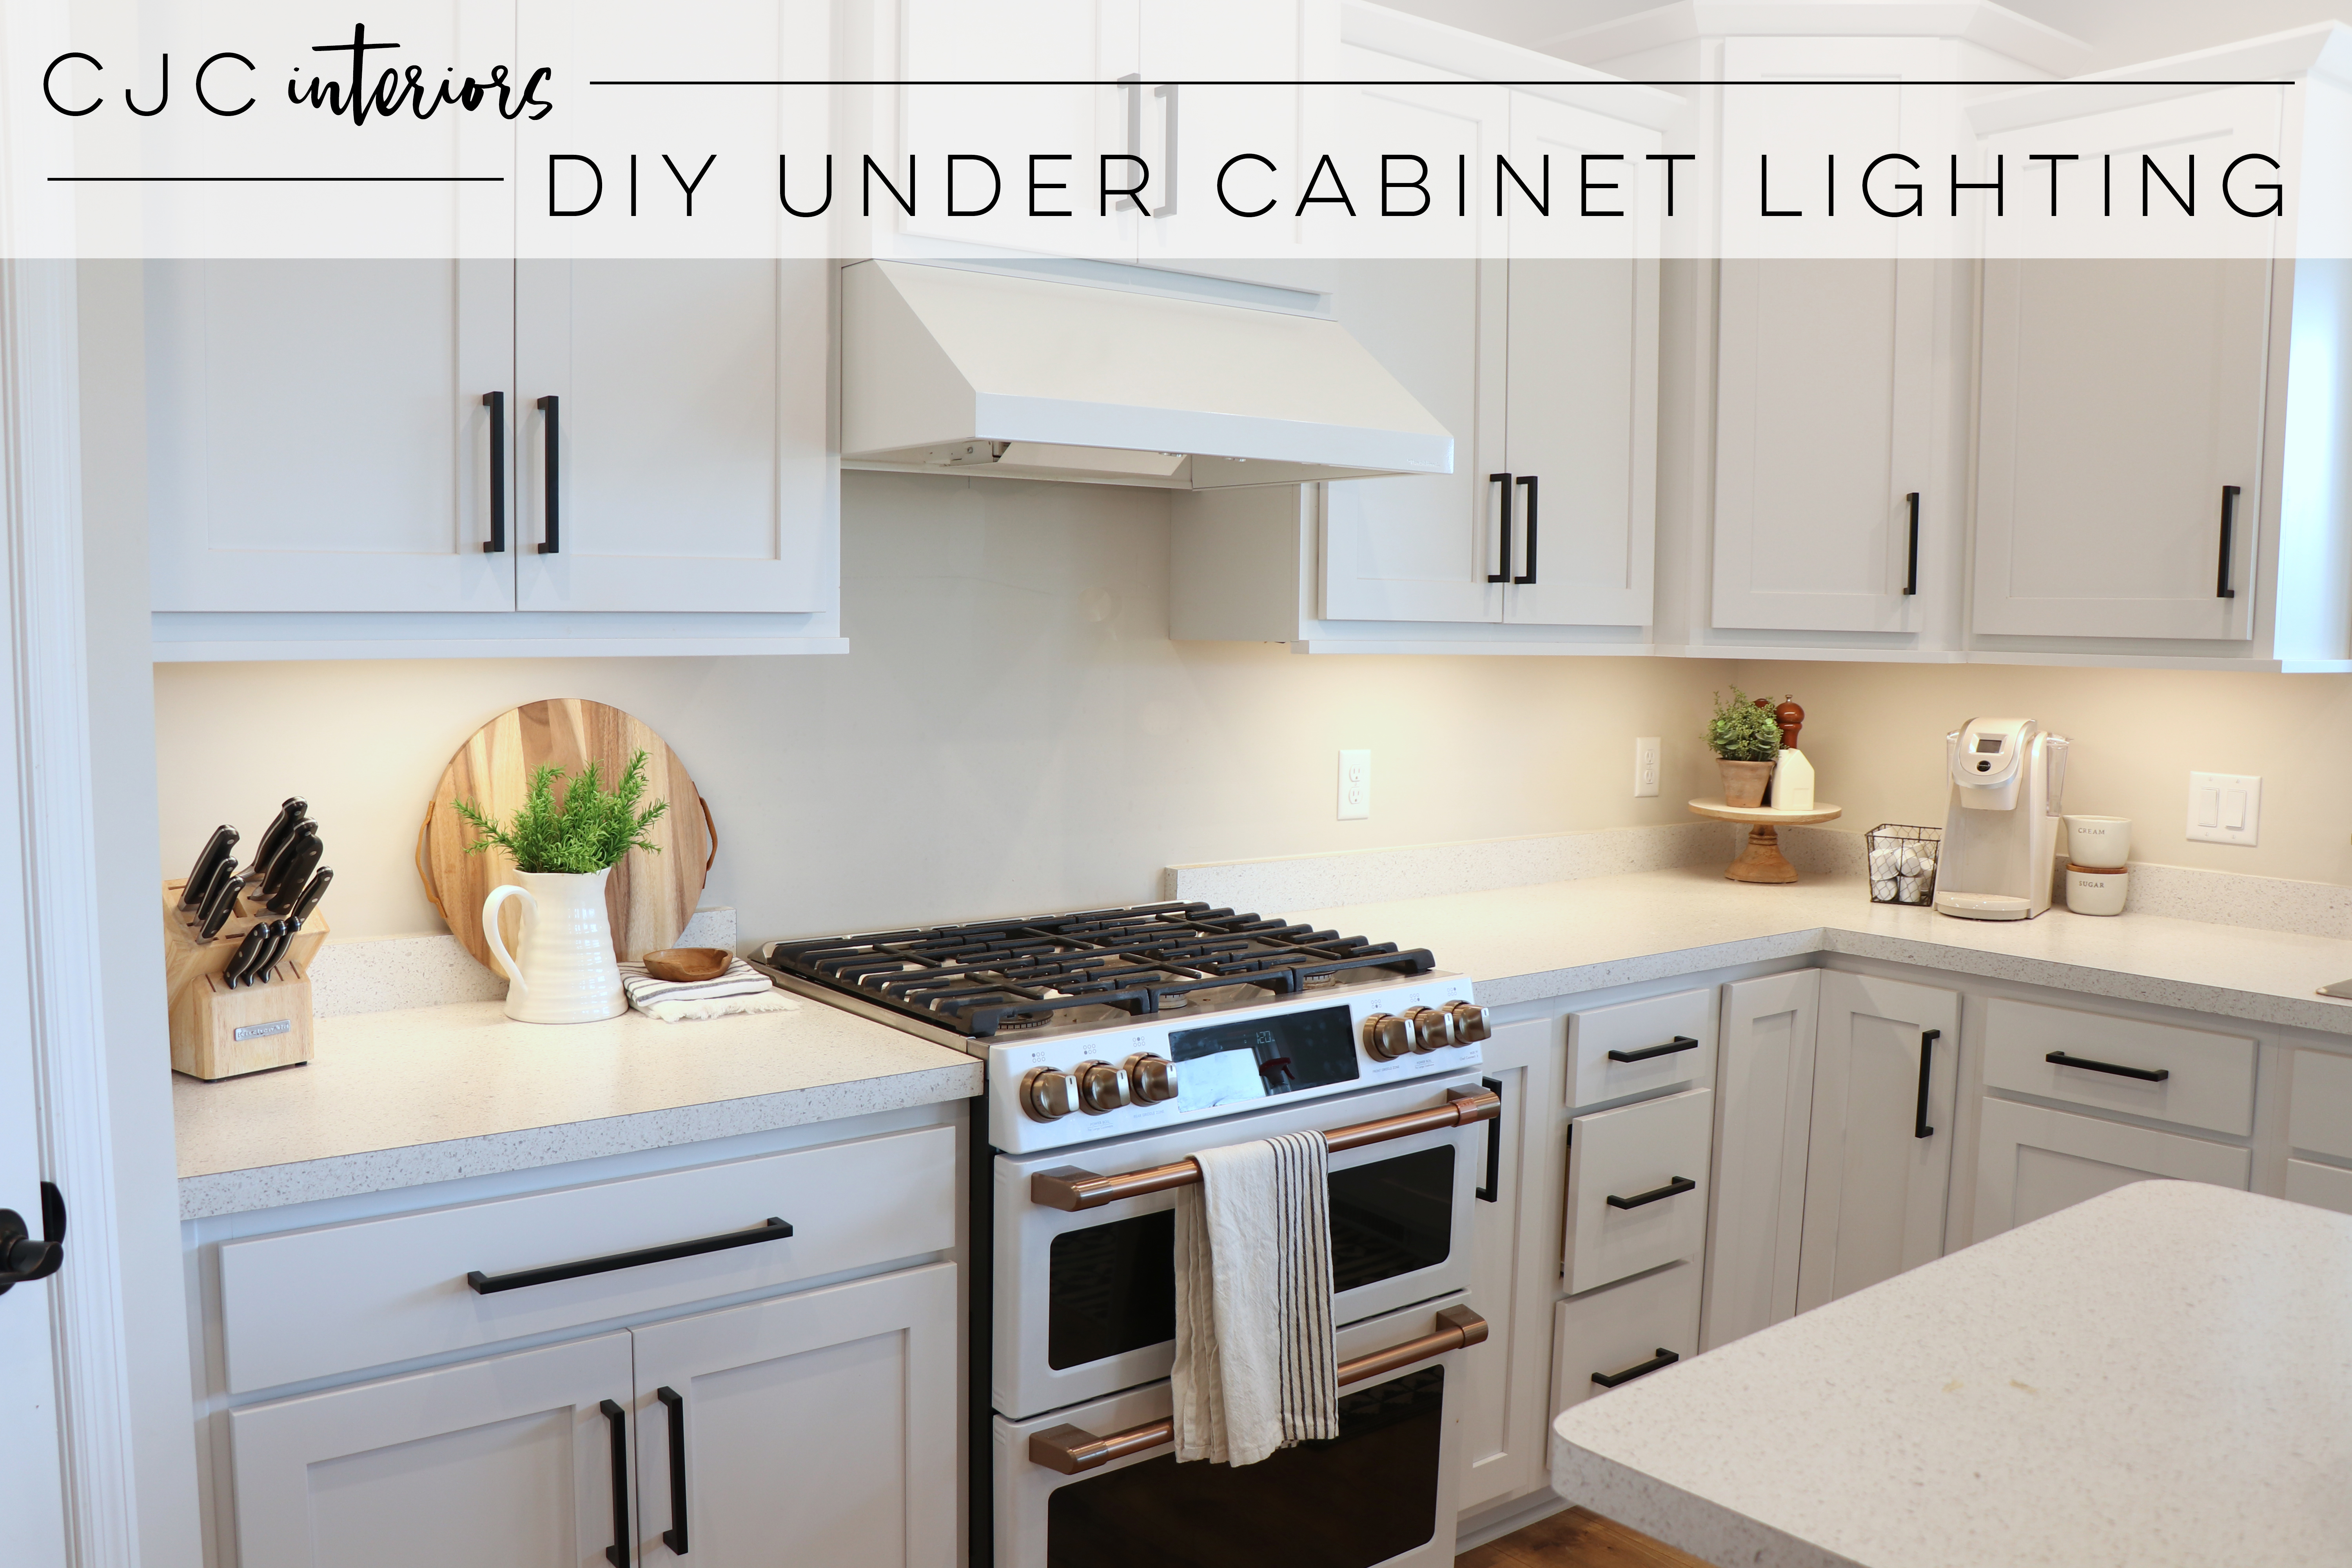 How To Install Under Cabinet Lighting Youtube